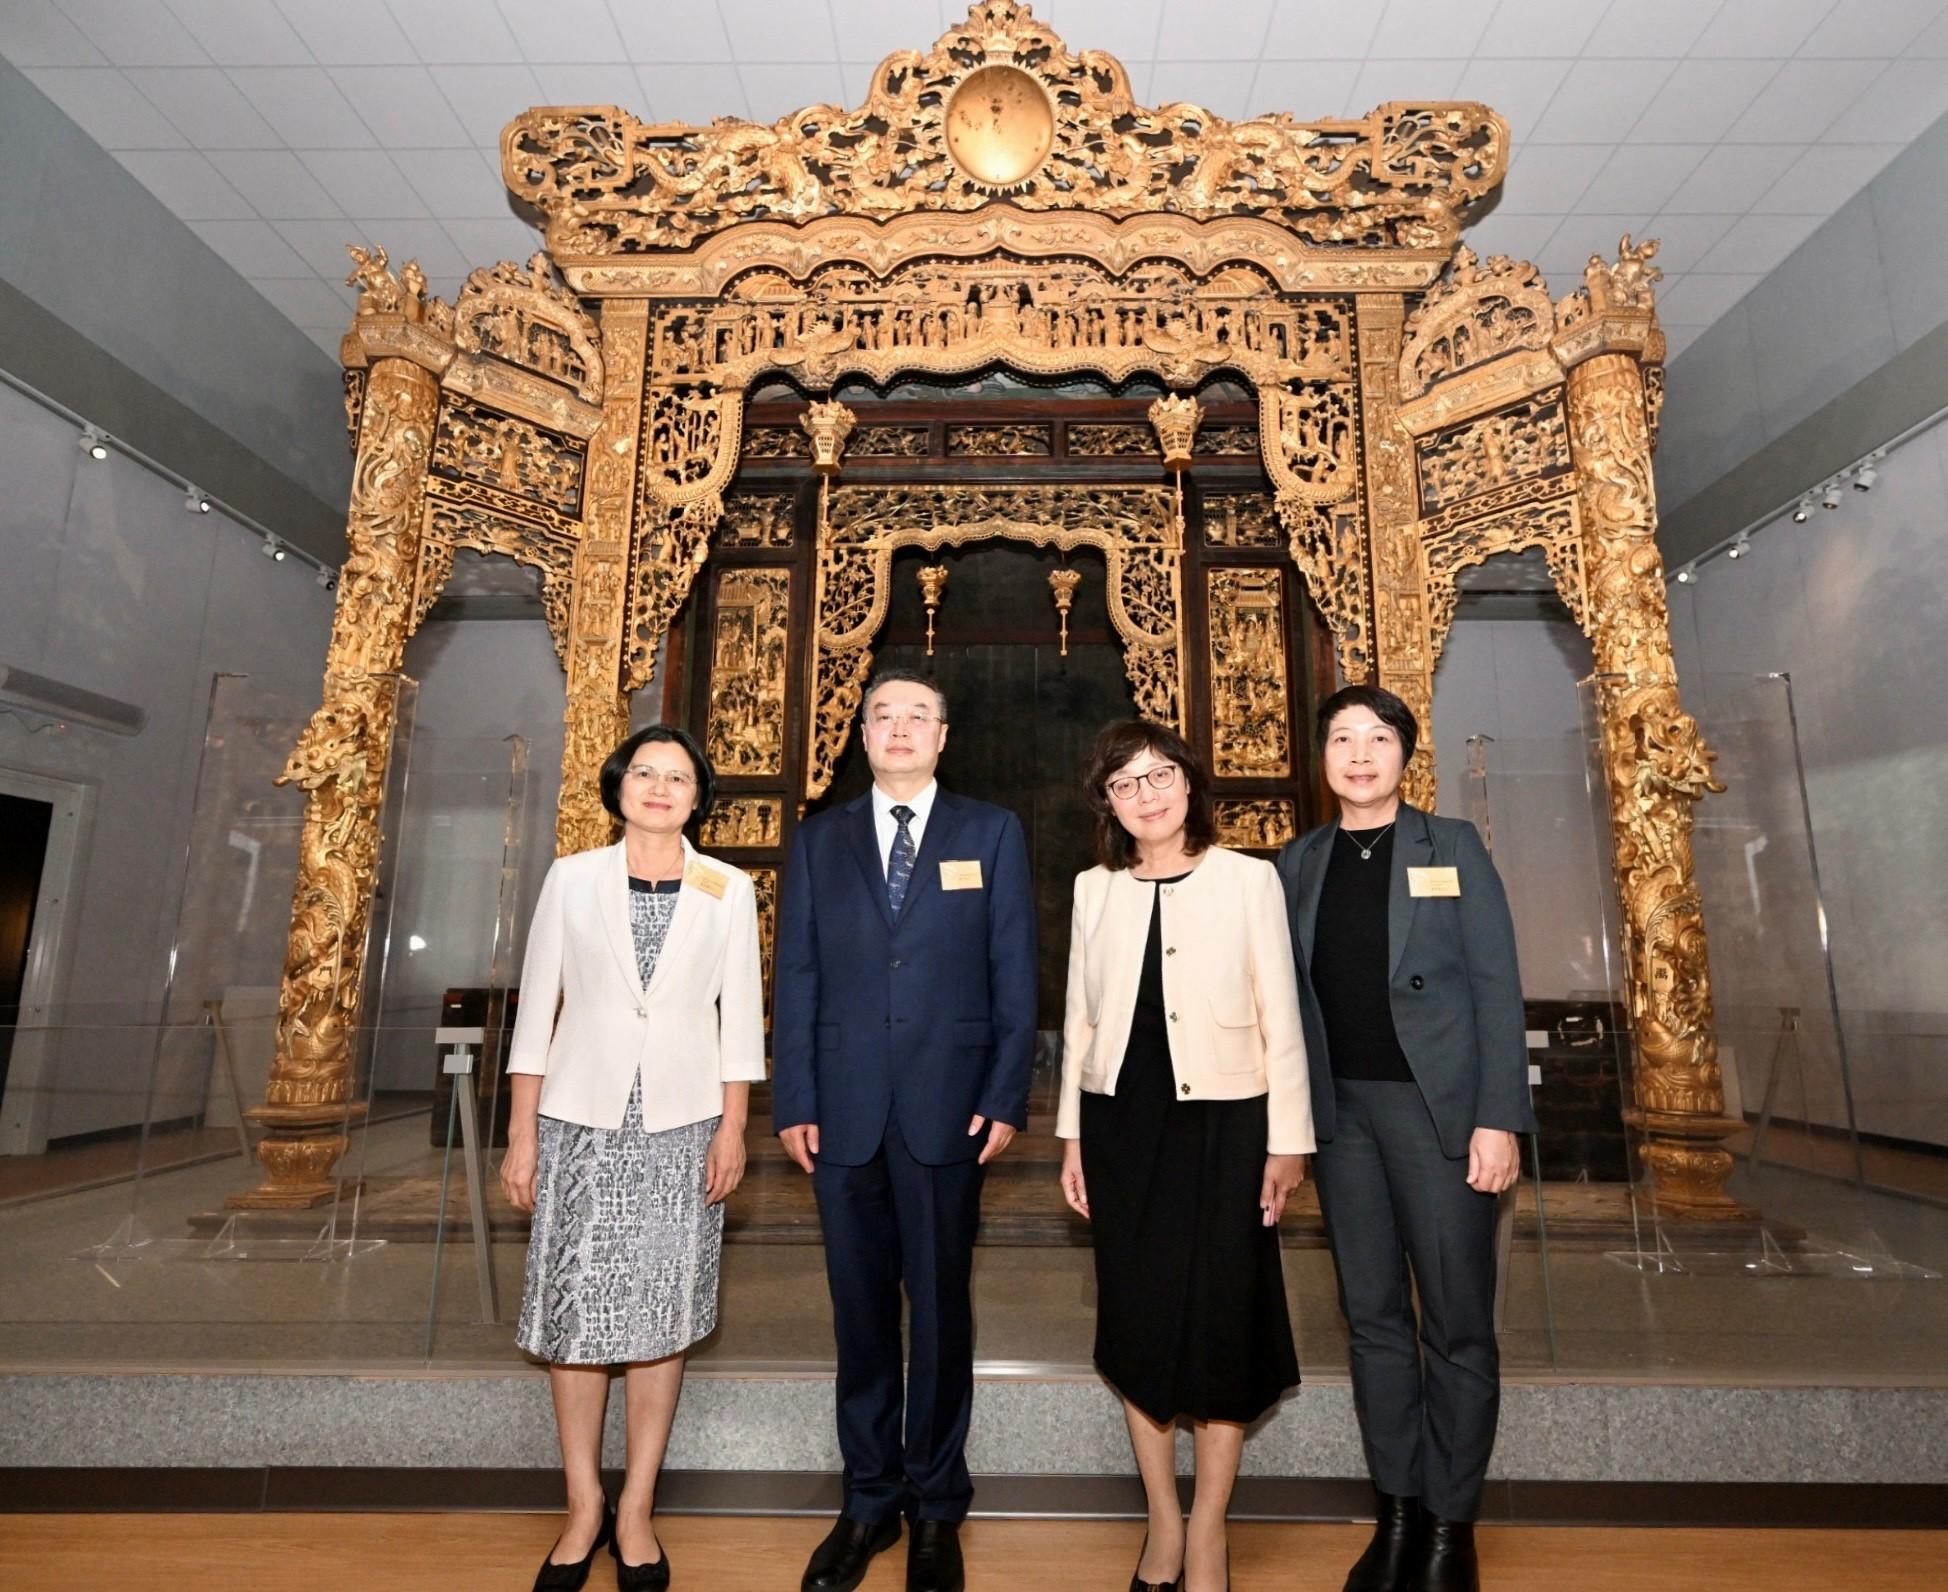 The "Under the Same Roof: Origin and Art of Lingnan Traditional Architecture" exhibition officially opened today (December 12). The Secretary for Development, Ms Bernadette Linn (second right); the Director of Art Exhibitions China, Mr Tan Ping (second left); the President of the Cultural Affairs Bureau of the Government of the Macao Special Administrative Region, Ms Leong Wai-man (first right); and the Deputy Director General of the Guangzhou Municipal Culture, Radio, Television and Tourism Bureau, Ms Ou Caiqun (first left), pictured in front of the star exhibit, Panyu shrine.